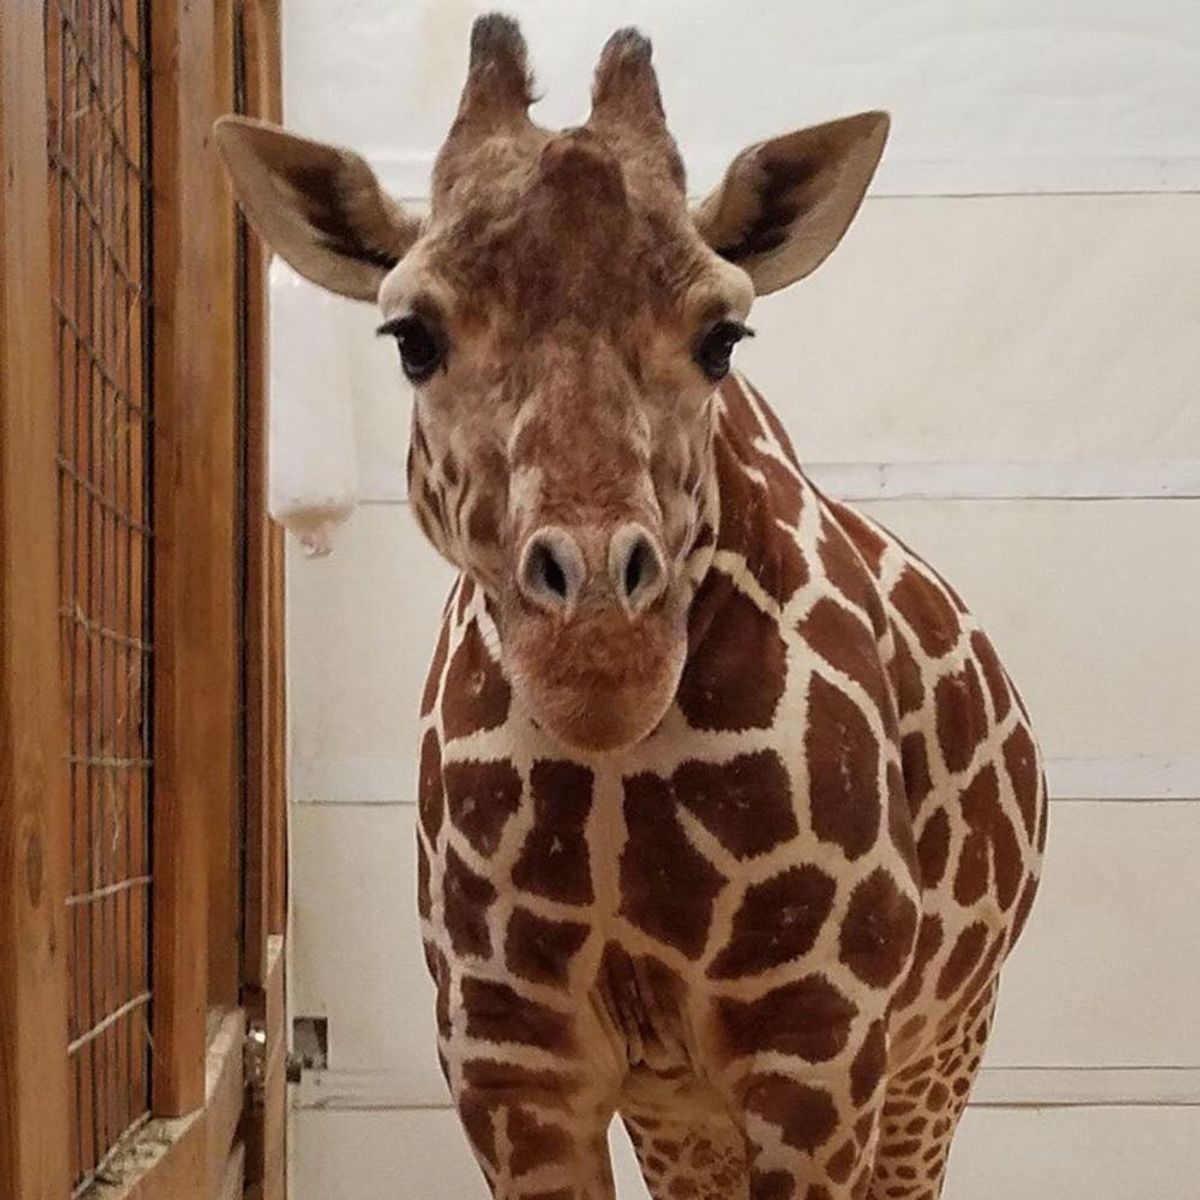 Rejoice! April the Giraffe Has FINALLY Given Birth and You Can Watch the Whole Thing Online